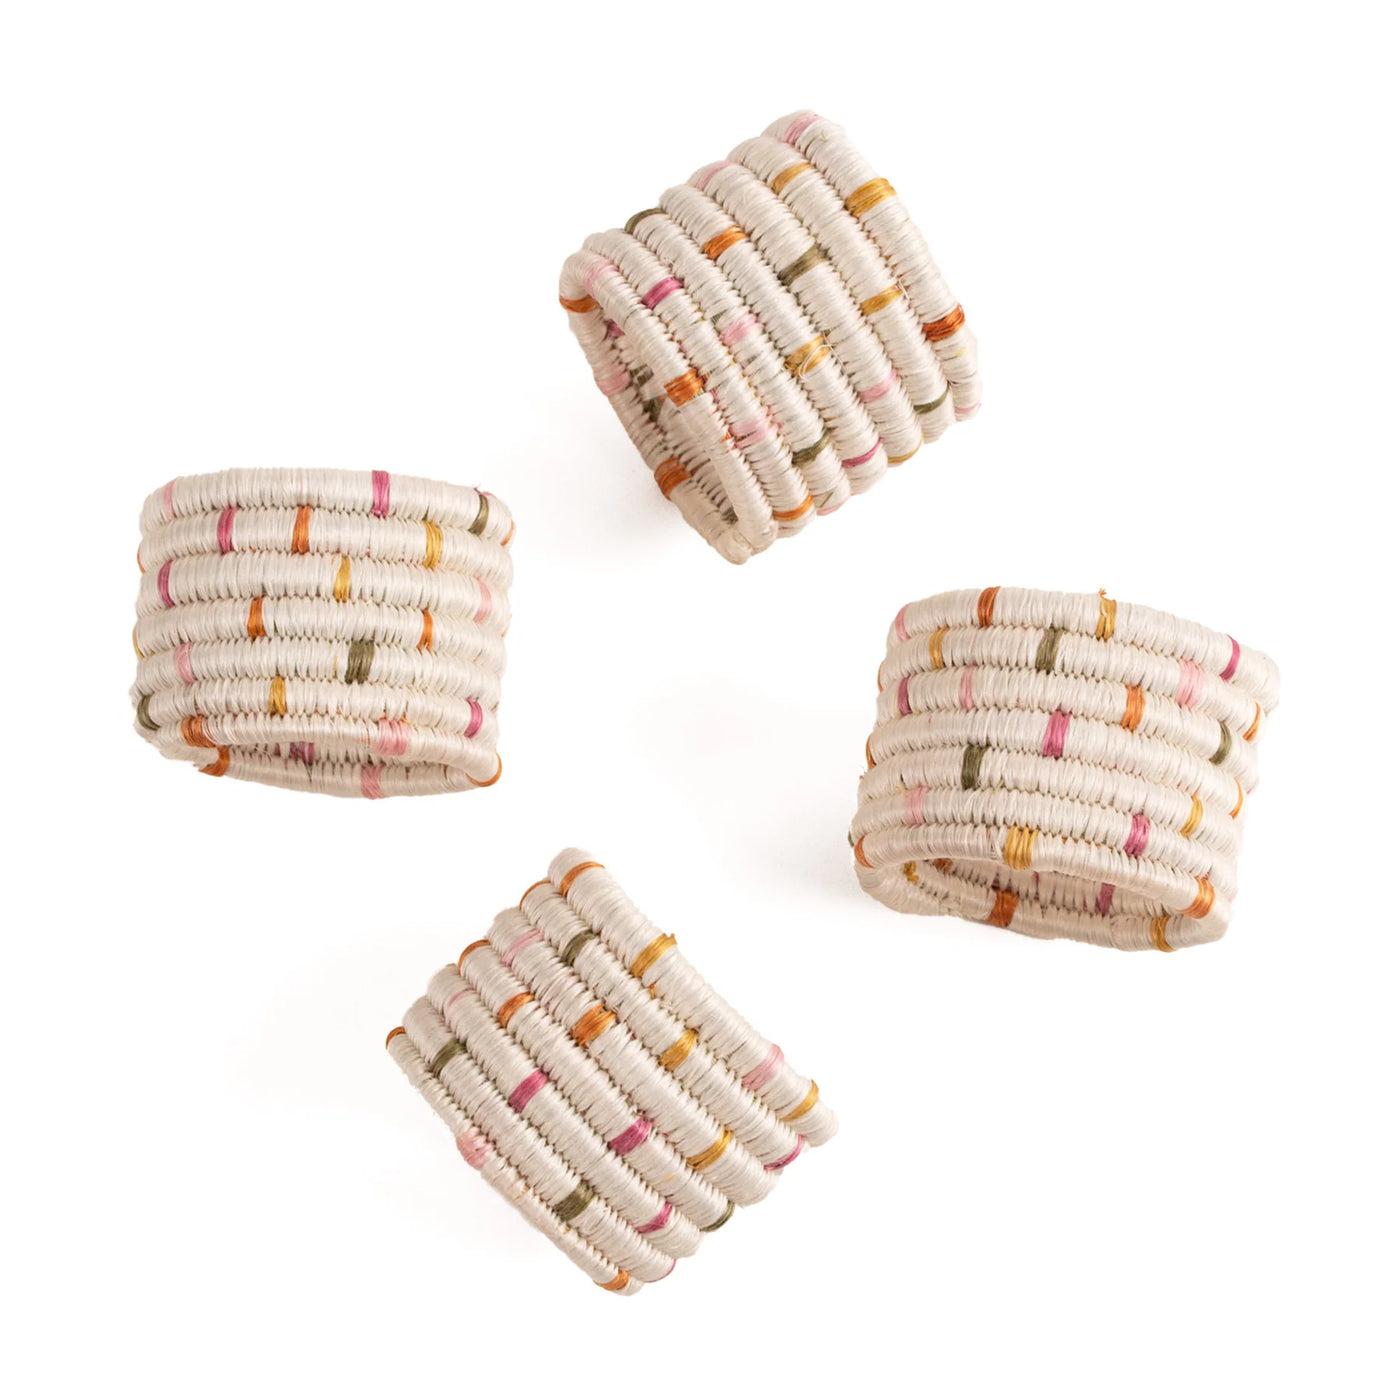 Bloom Napkin Rings - Speckled, Set of 4 by Kazi